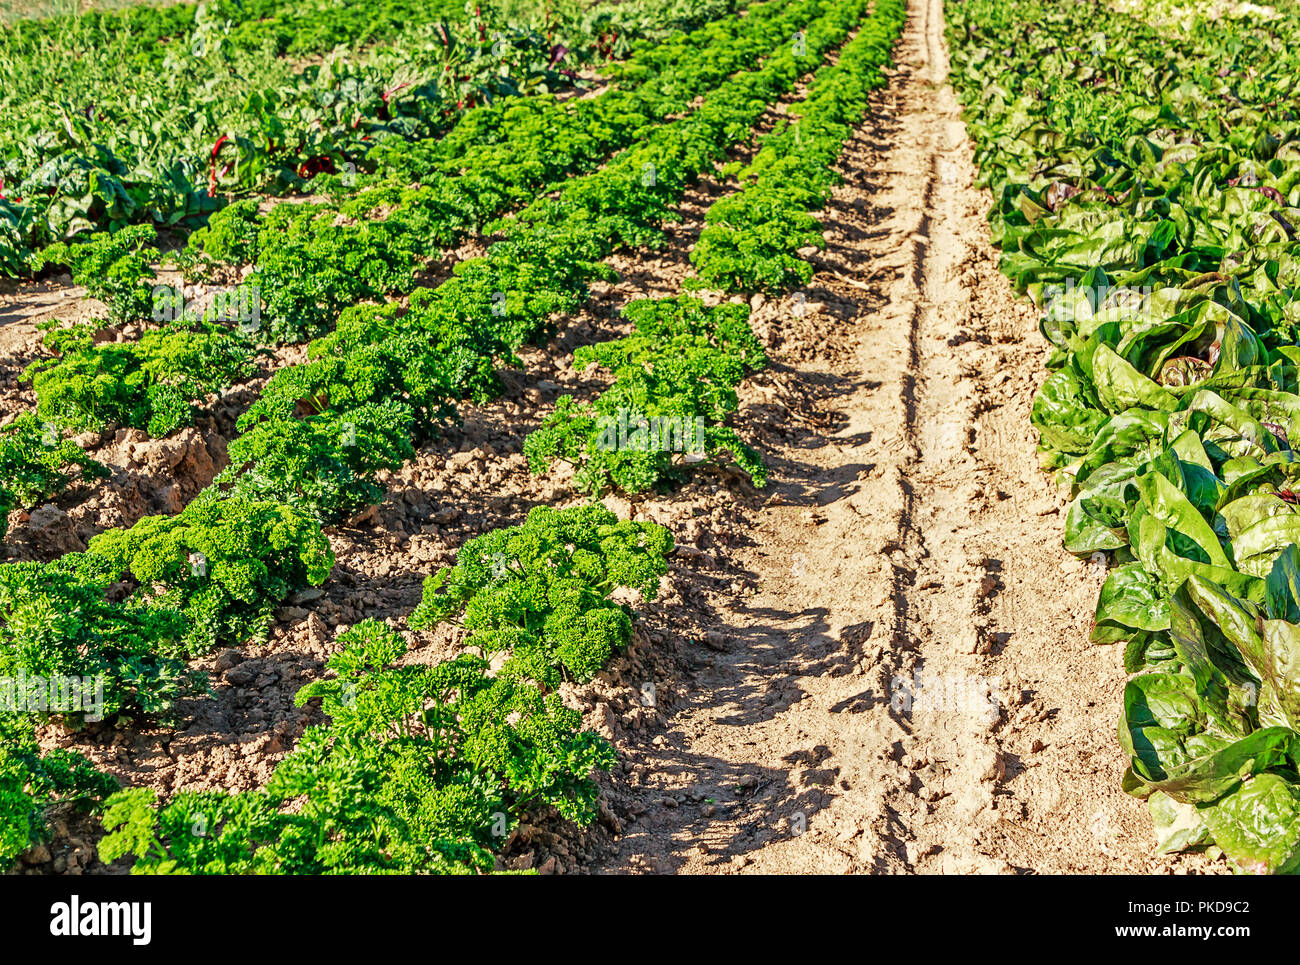 Organic farming in Germany - field with long rows of parsley and lettuce plants. Stock Photo